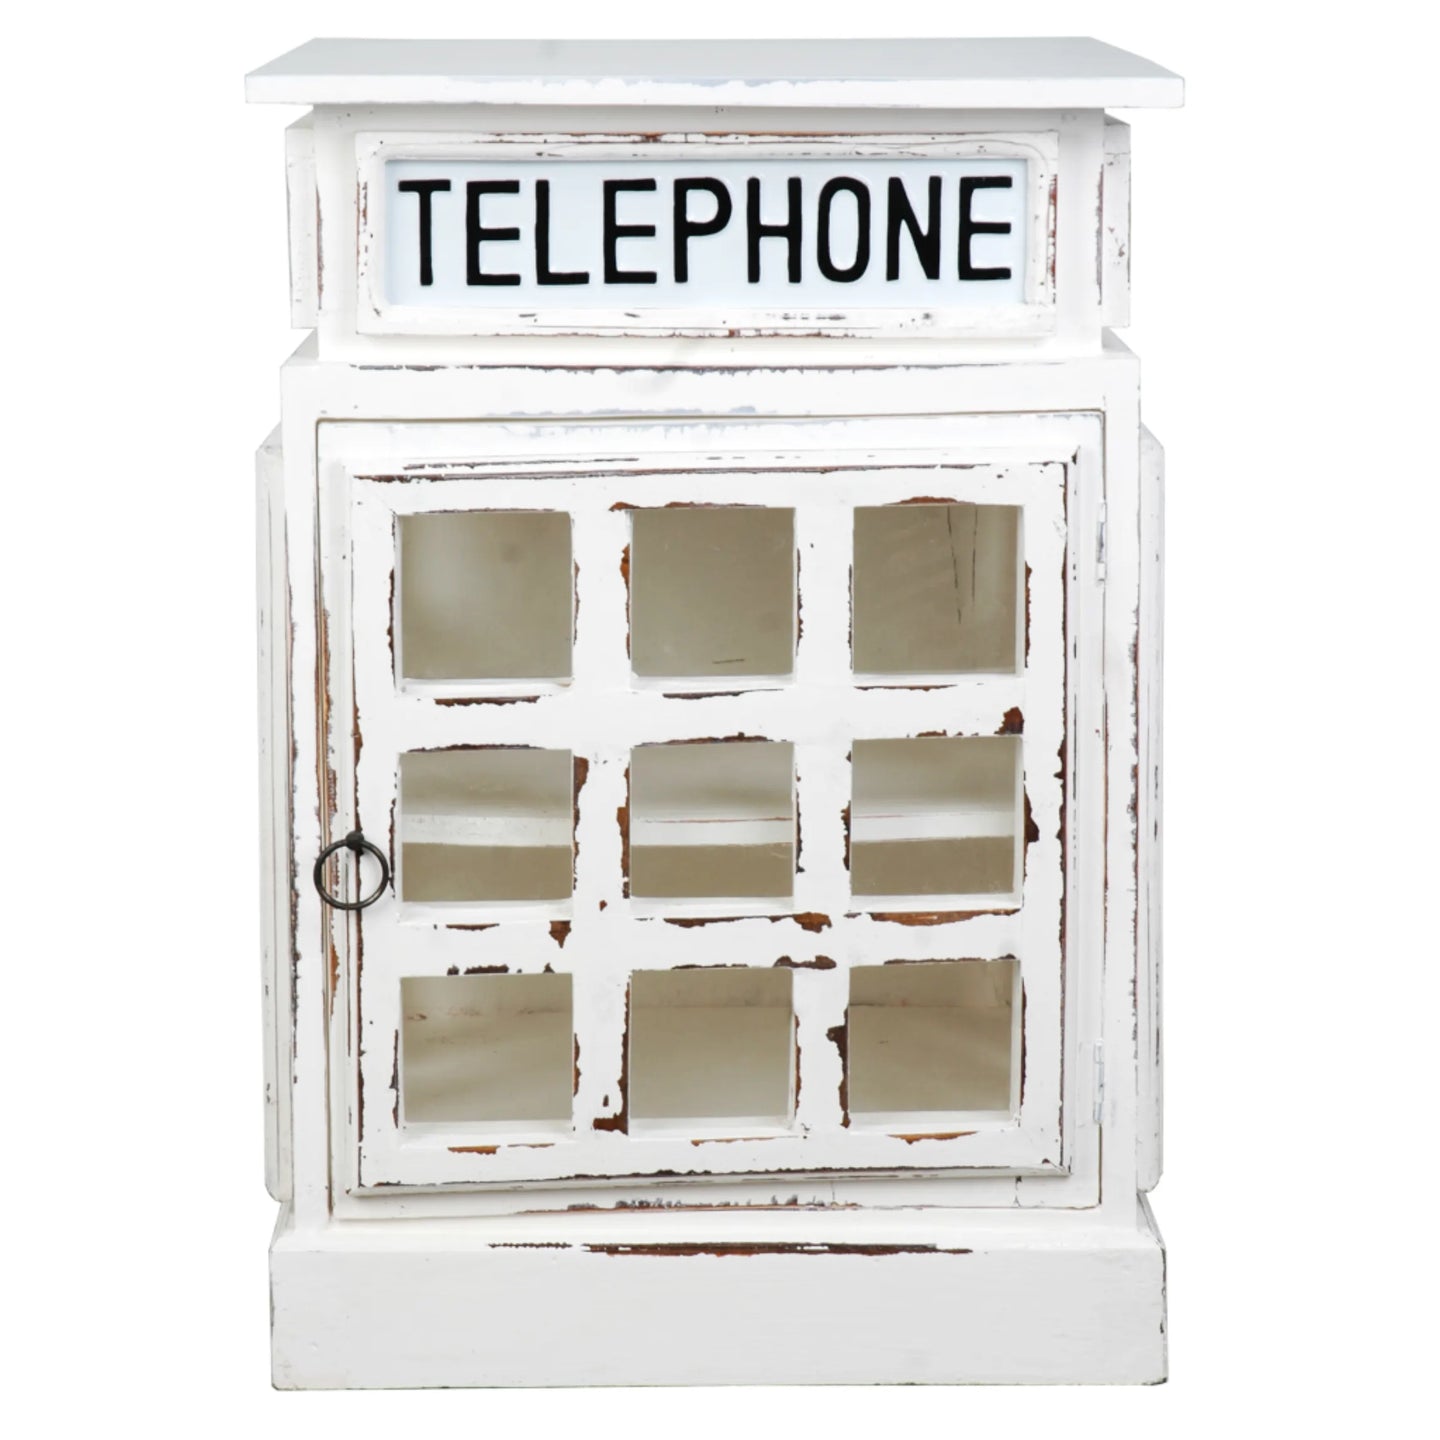 Sunset Trading Cottage English Phone Booth End Table | Distressed White | Solid Wood | Fully Assembled Glass Display Accent Furniture